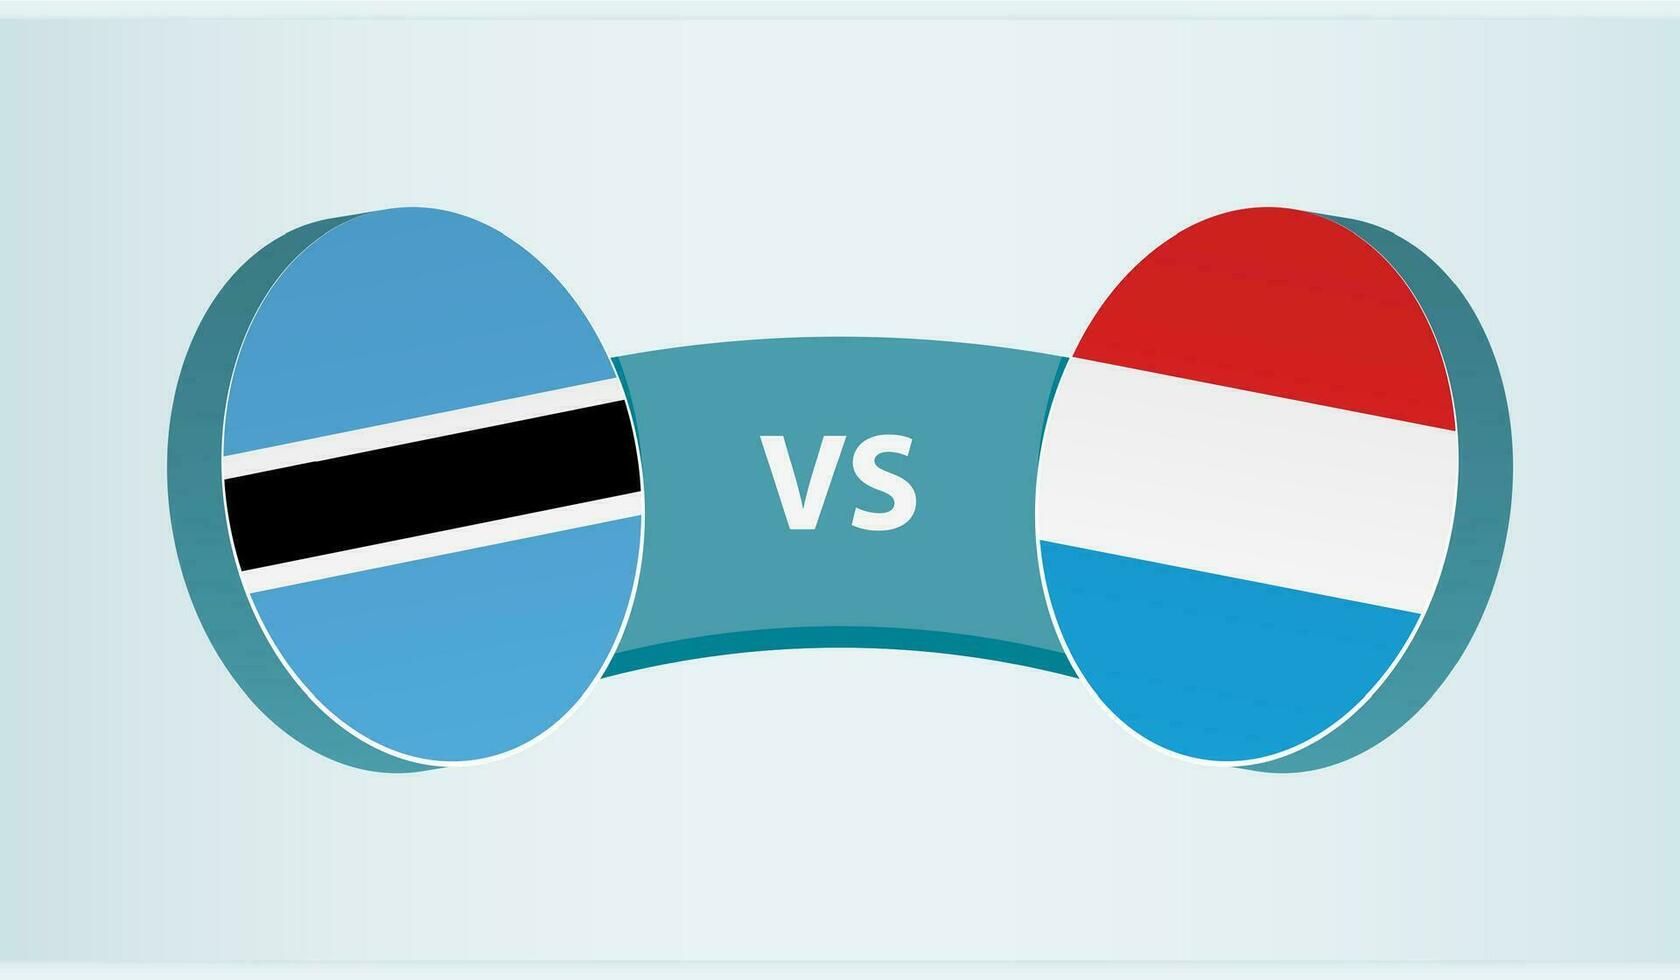 Botswana versus Luxembourg, team sports competition concept. vector